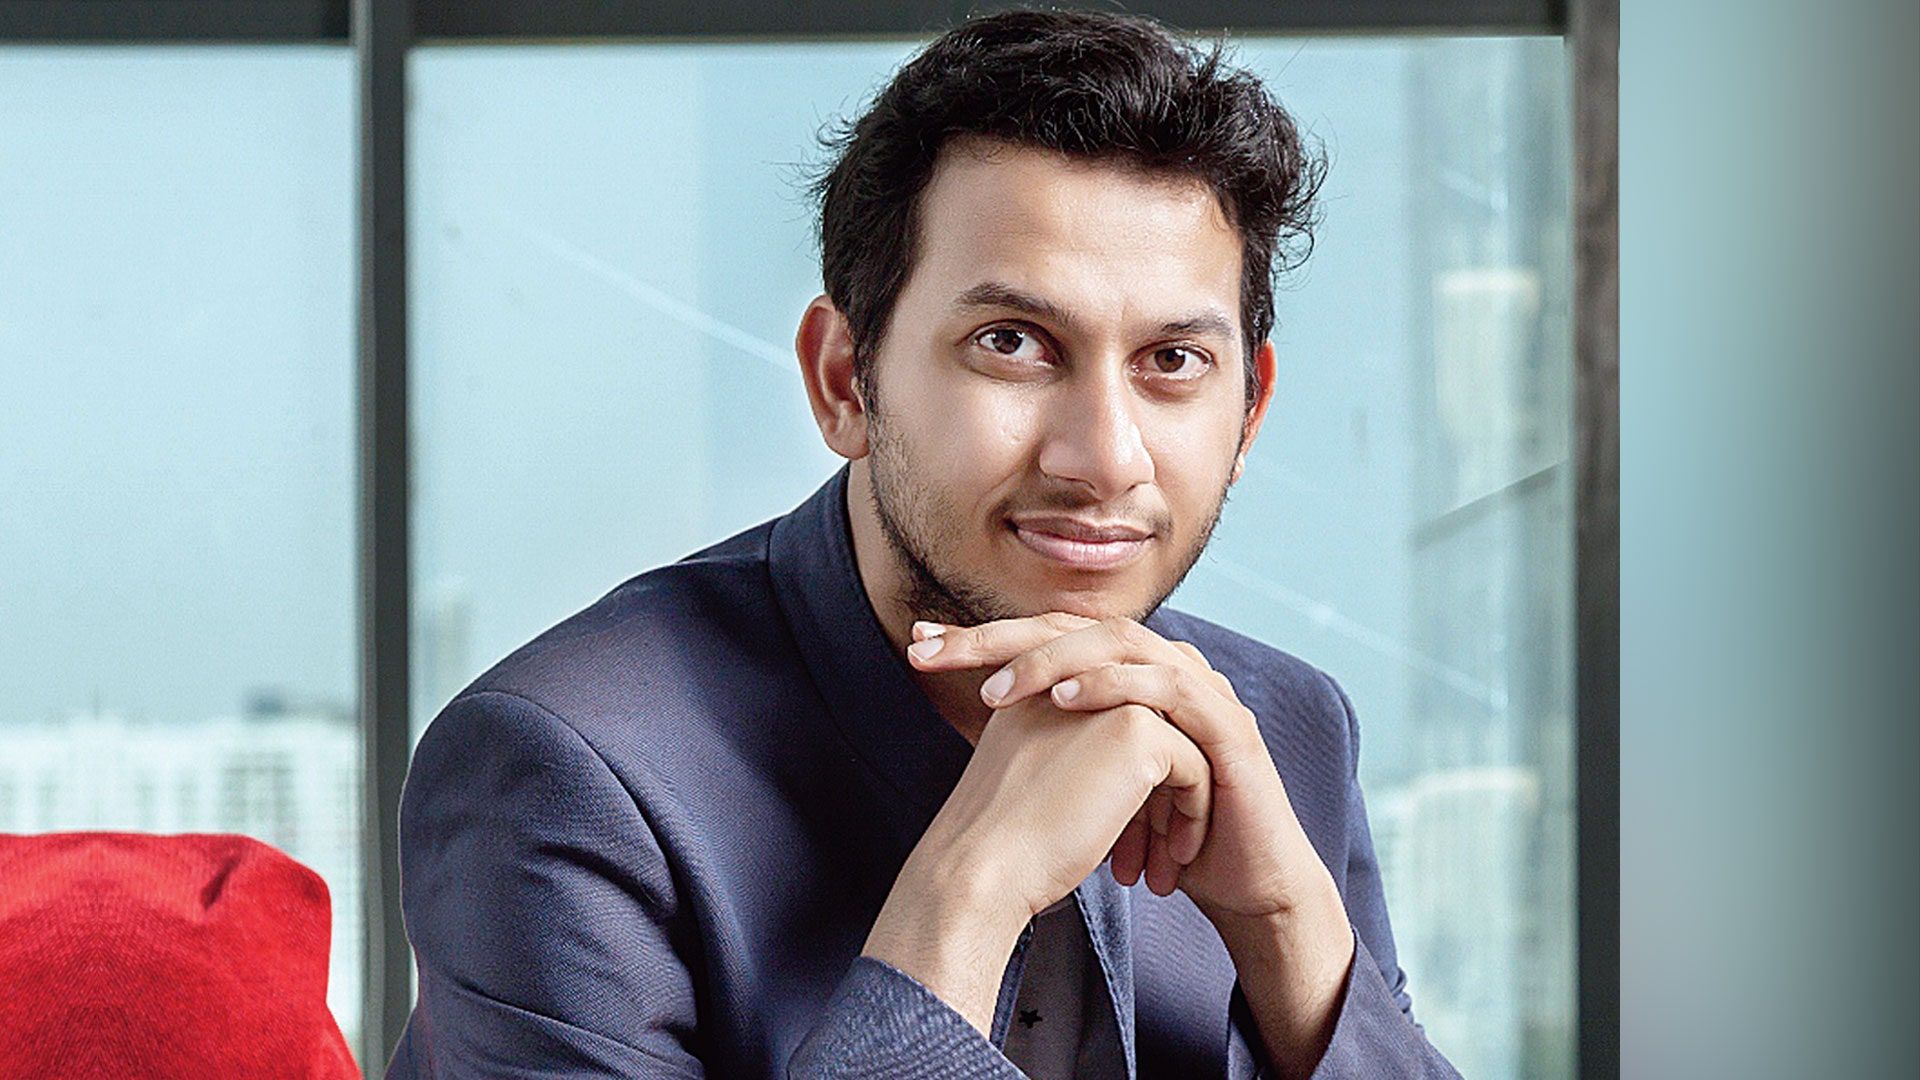 Things To Know About India's Youngest Self Made Billionaire, Ritesh Agarwal With A Net Worth Of Rs 877 Crores